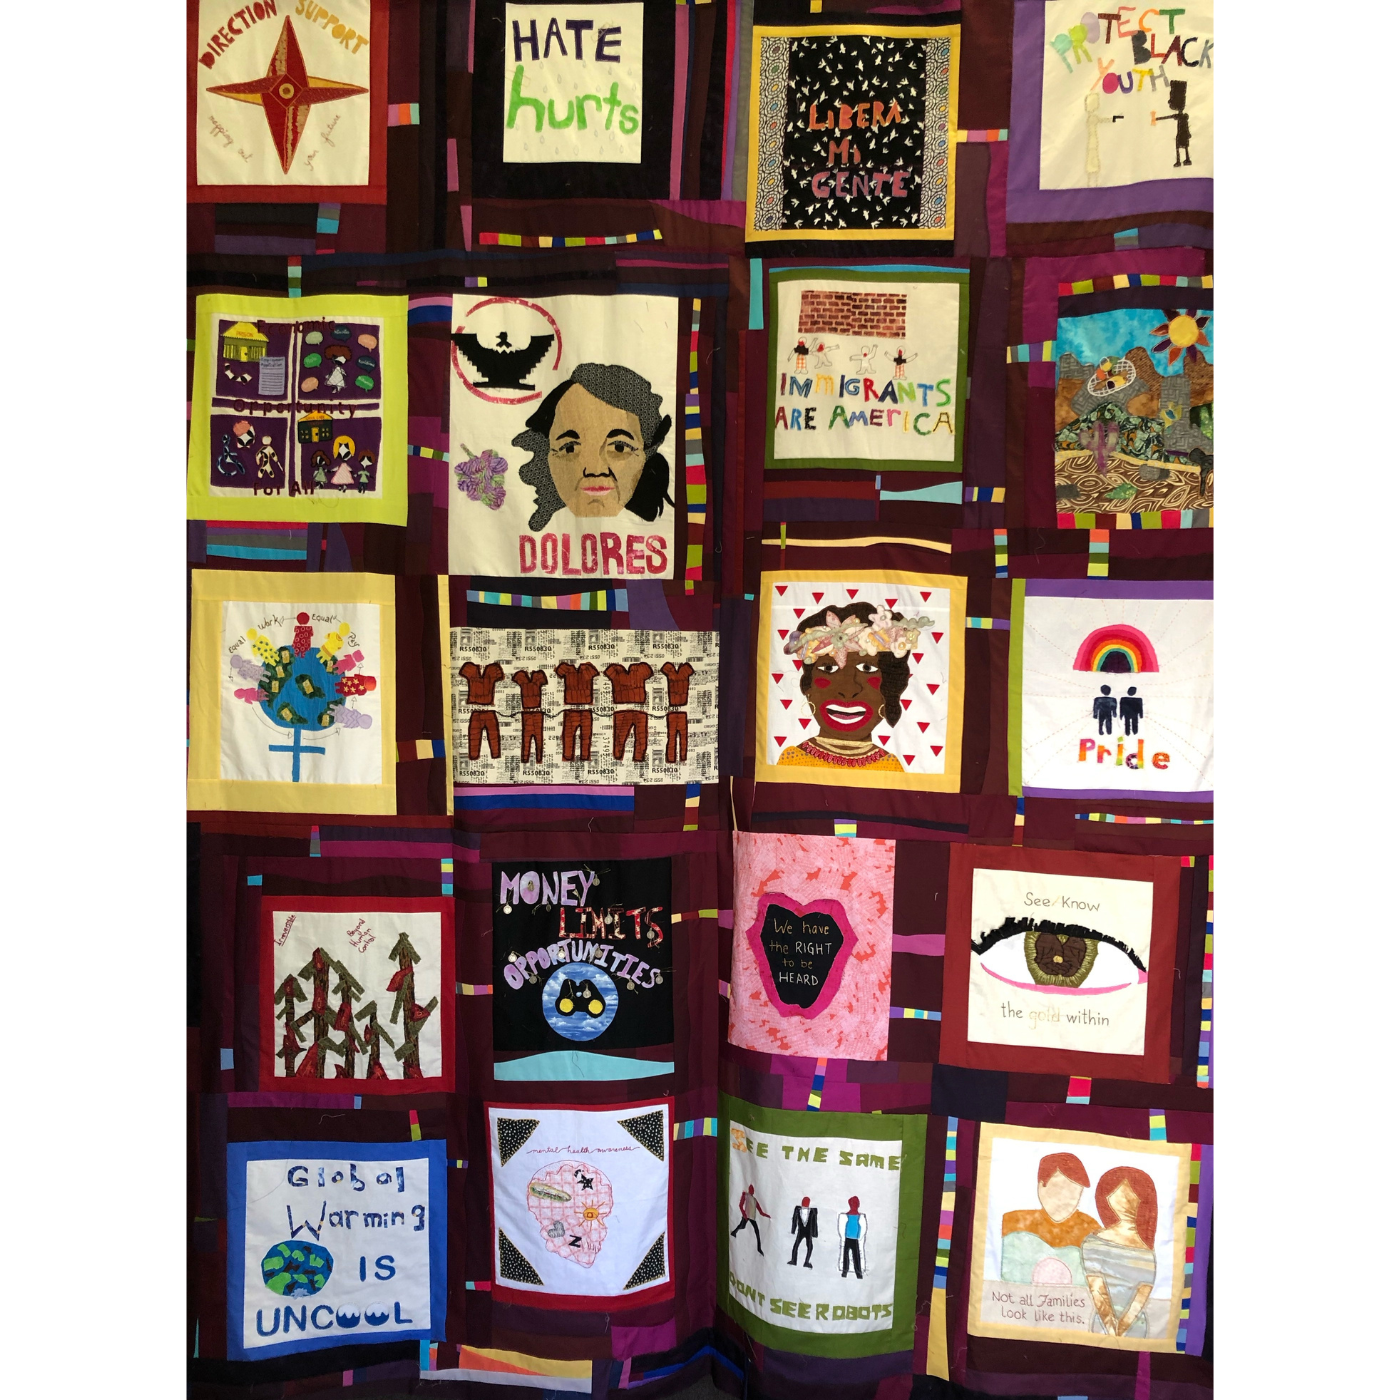 A full size quilt is on display. The 19 blocks in the quilt, which has a burgundy background, cover many social justice issues including global warming, protecting Black youth, gay pride and more.